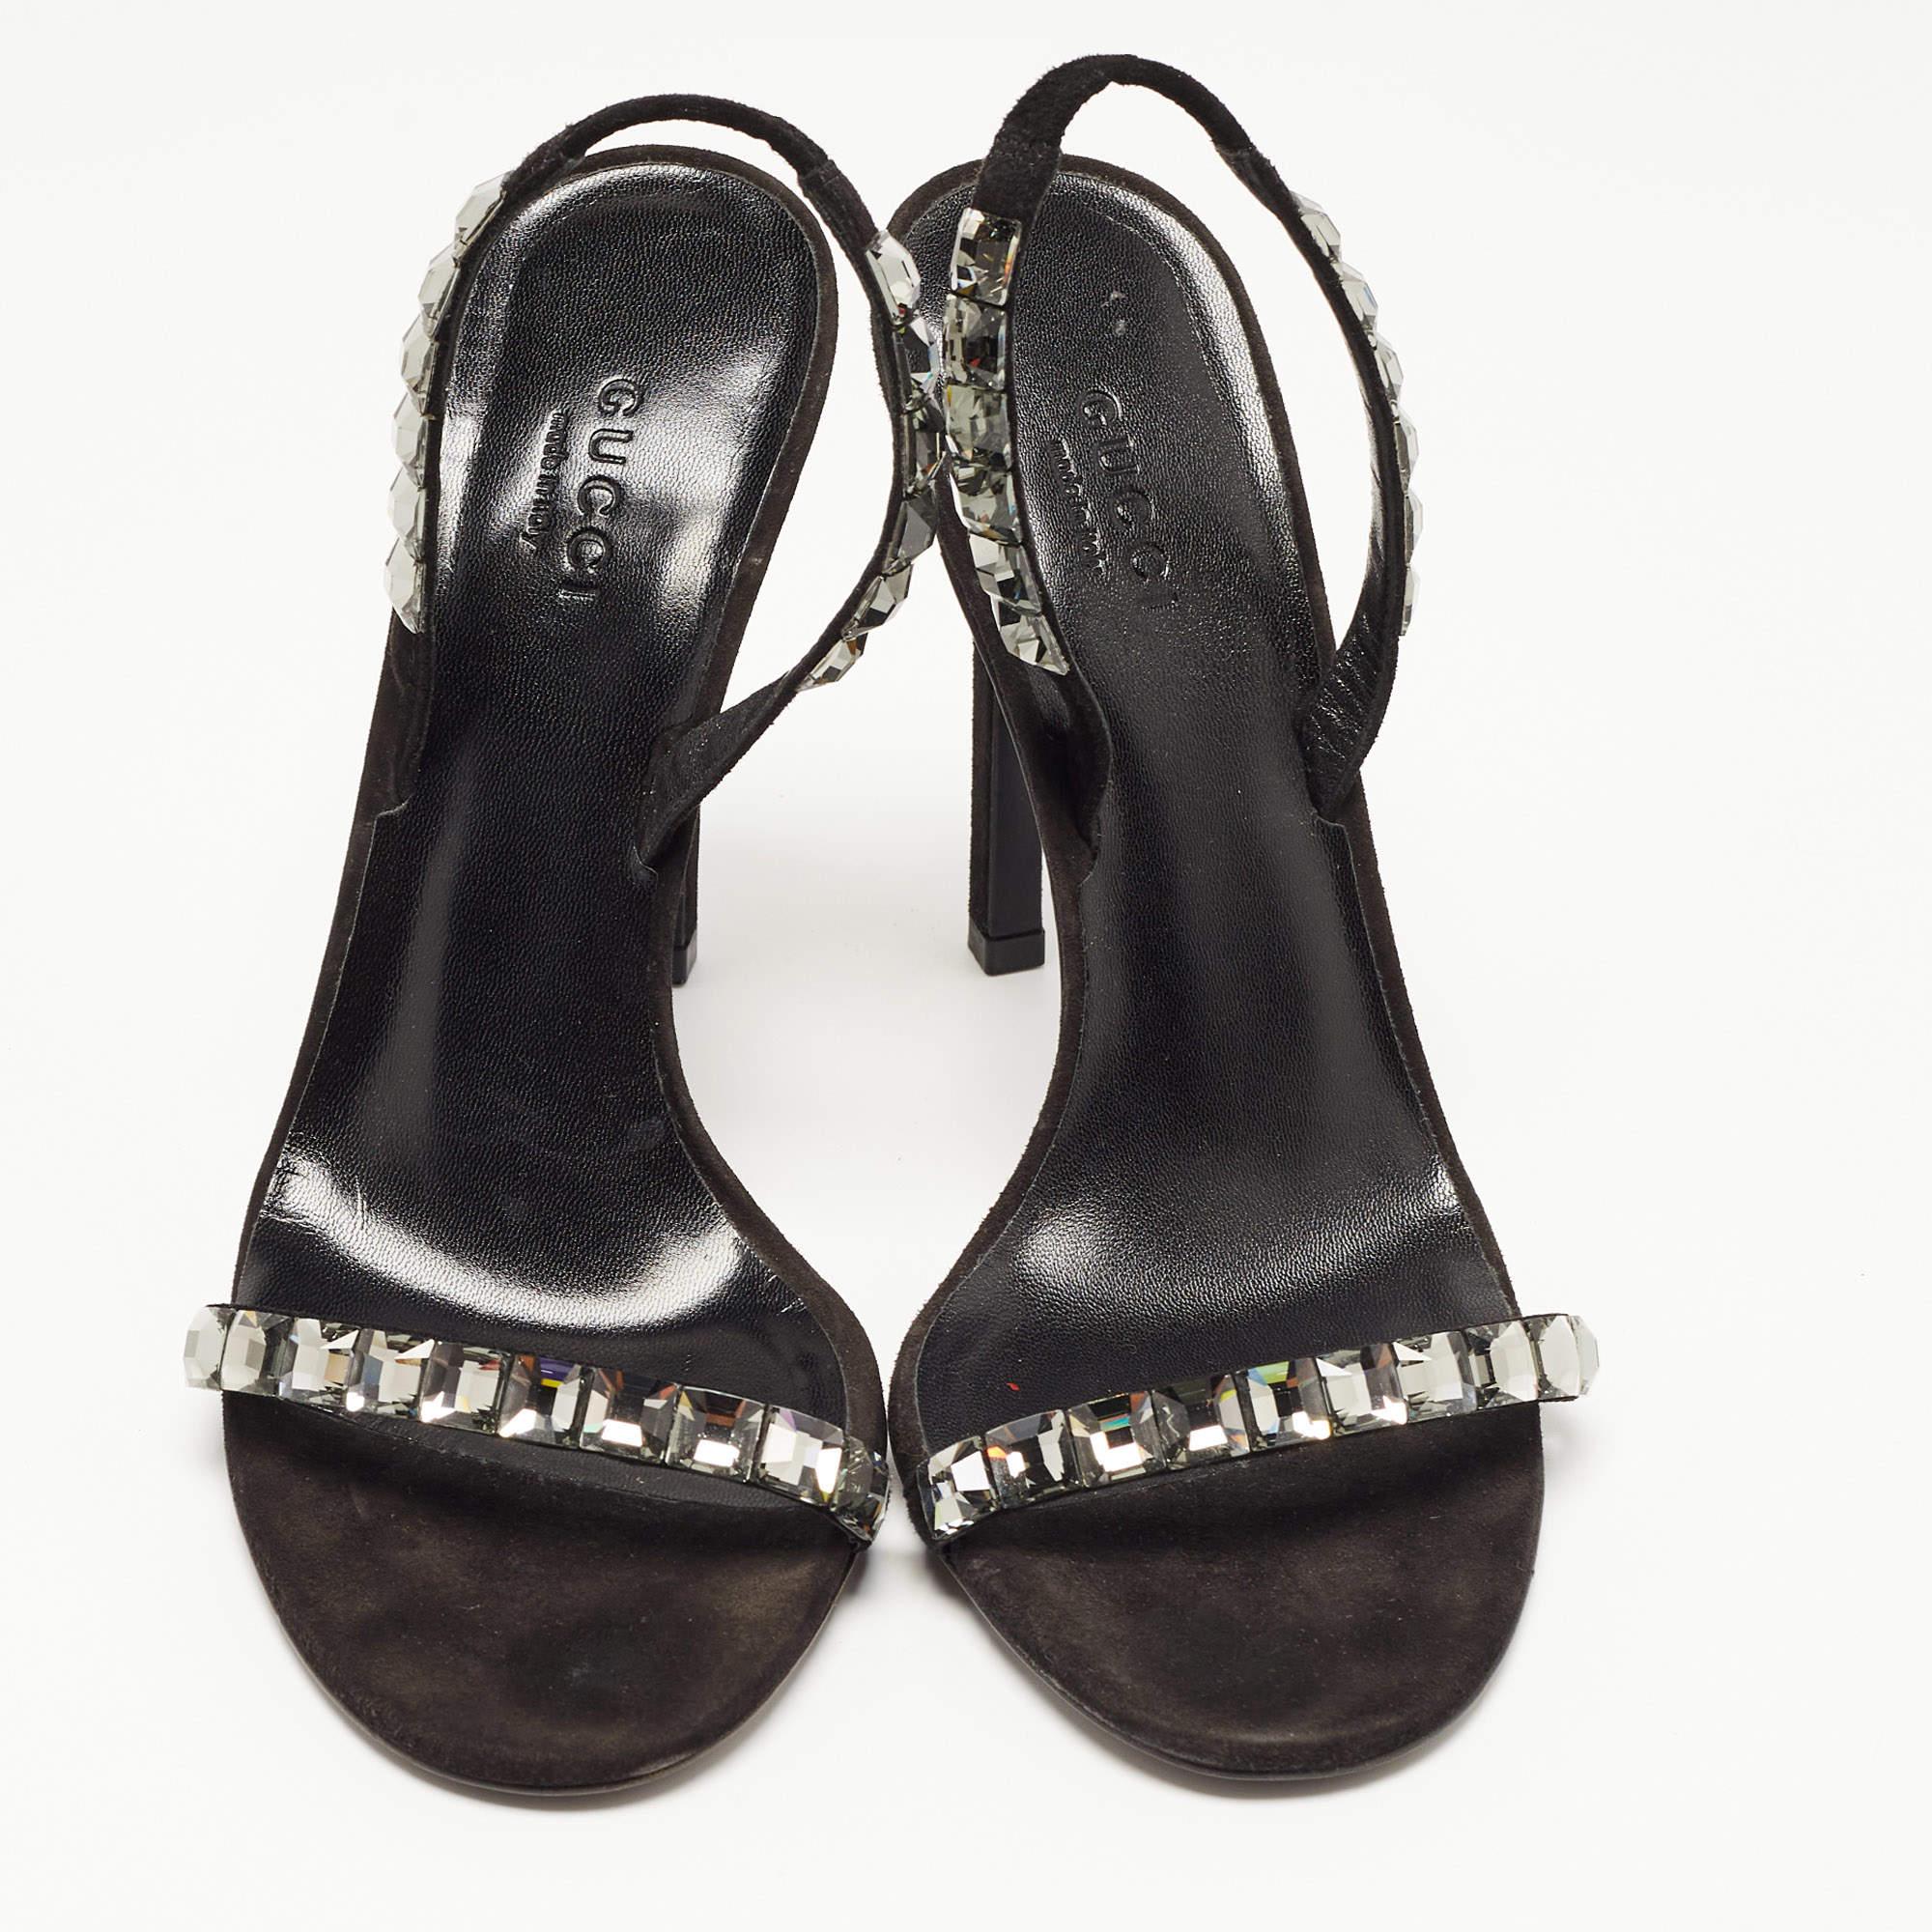 Gucci Black Suede Embellished Mallory Sandals Size 37 In Good Condition For Sale In Dubai, Al Qouz 2